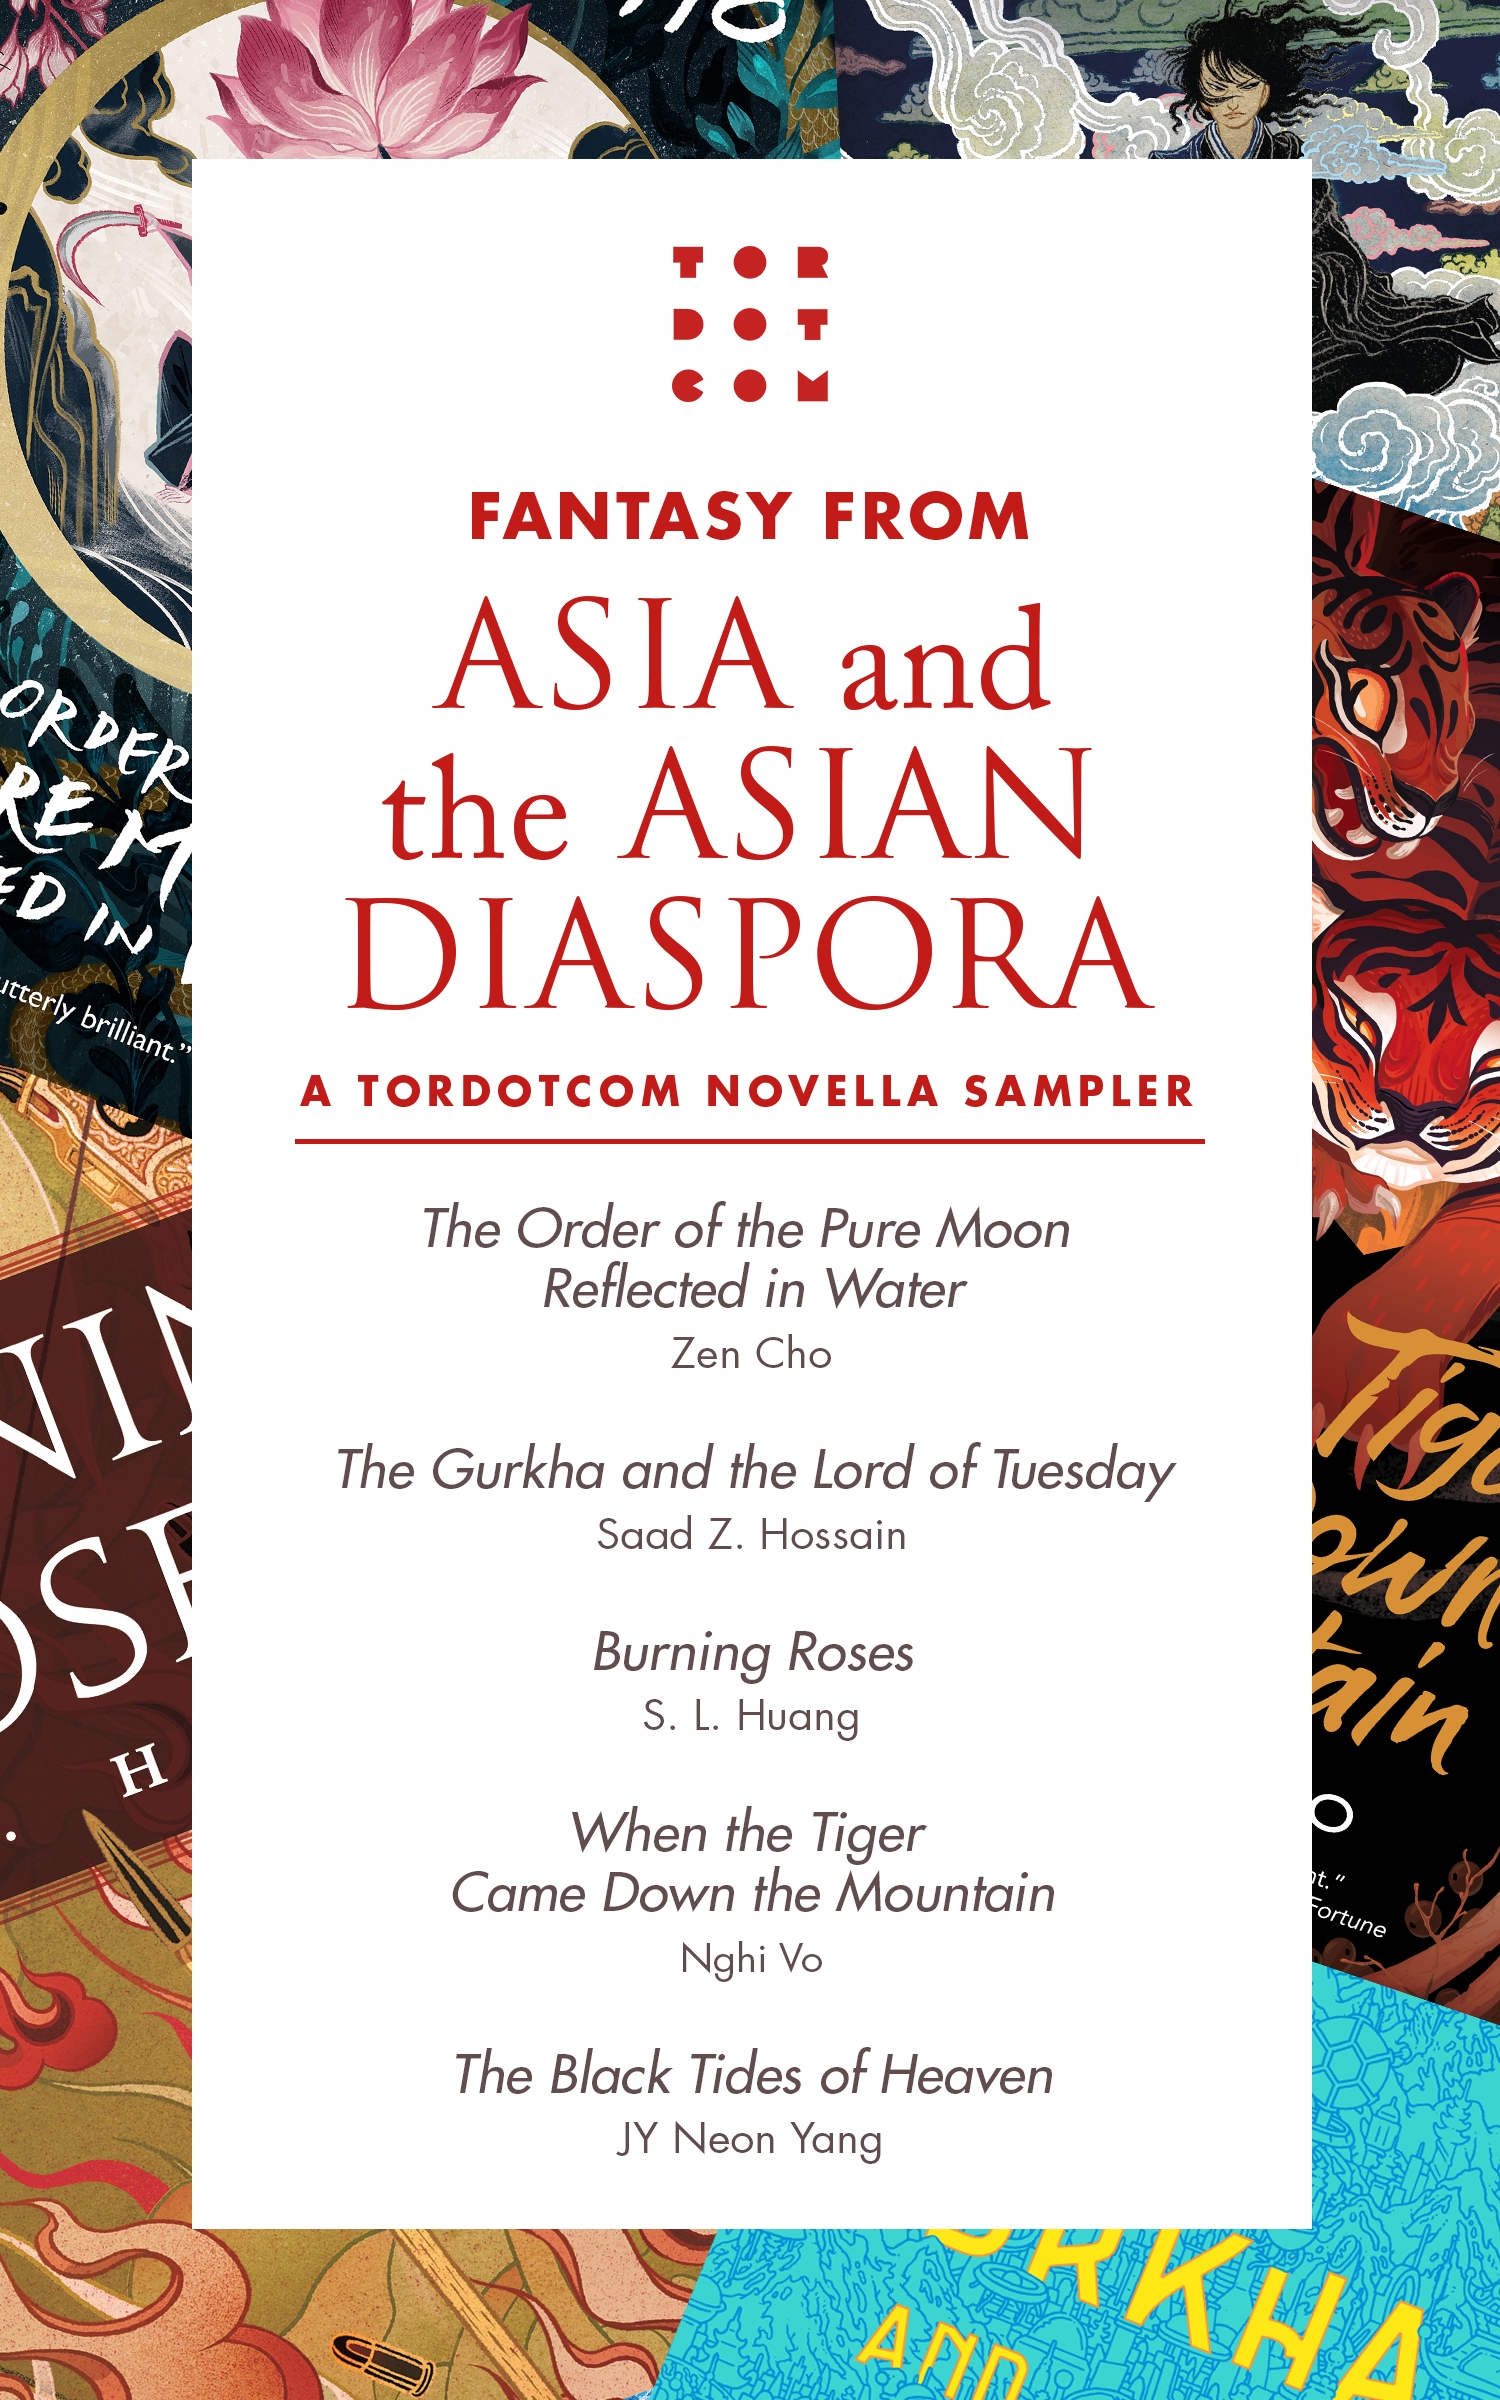 Fantasy from Asia and the Asian Diaspora : A Tordotcom Novella Sampler by Neon Yang, Saad Z. Hossain, Zen Cho, S. L. Huang, Nghi Vo